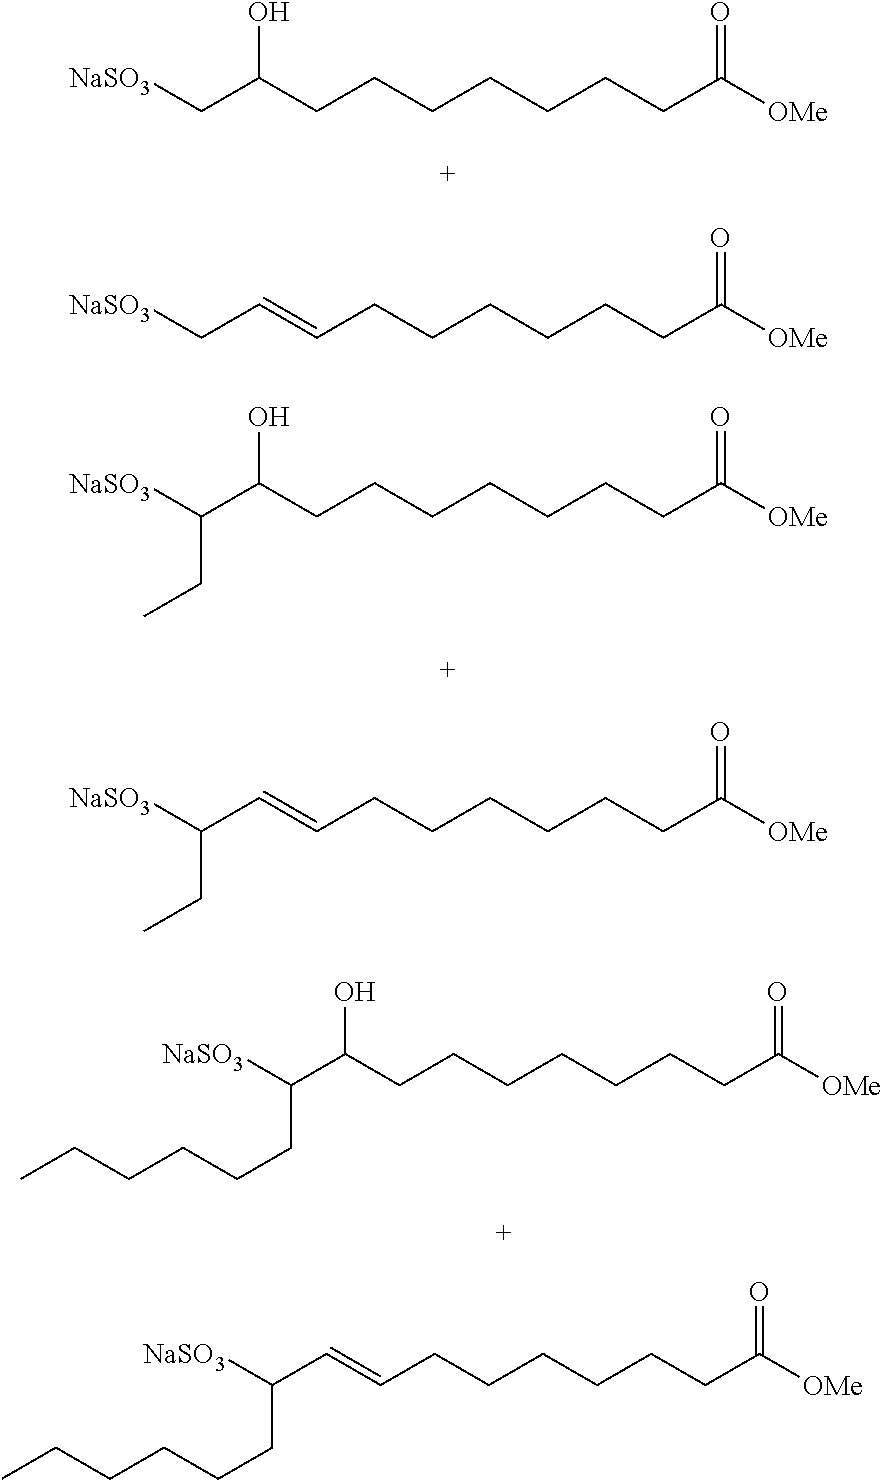 Sulfonates from natural oil metathesis